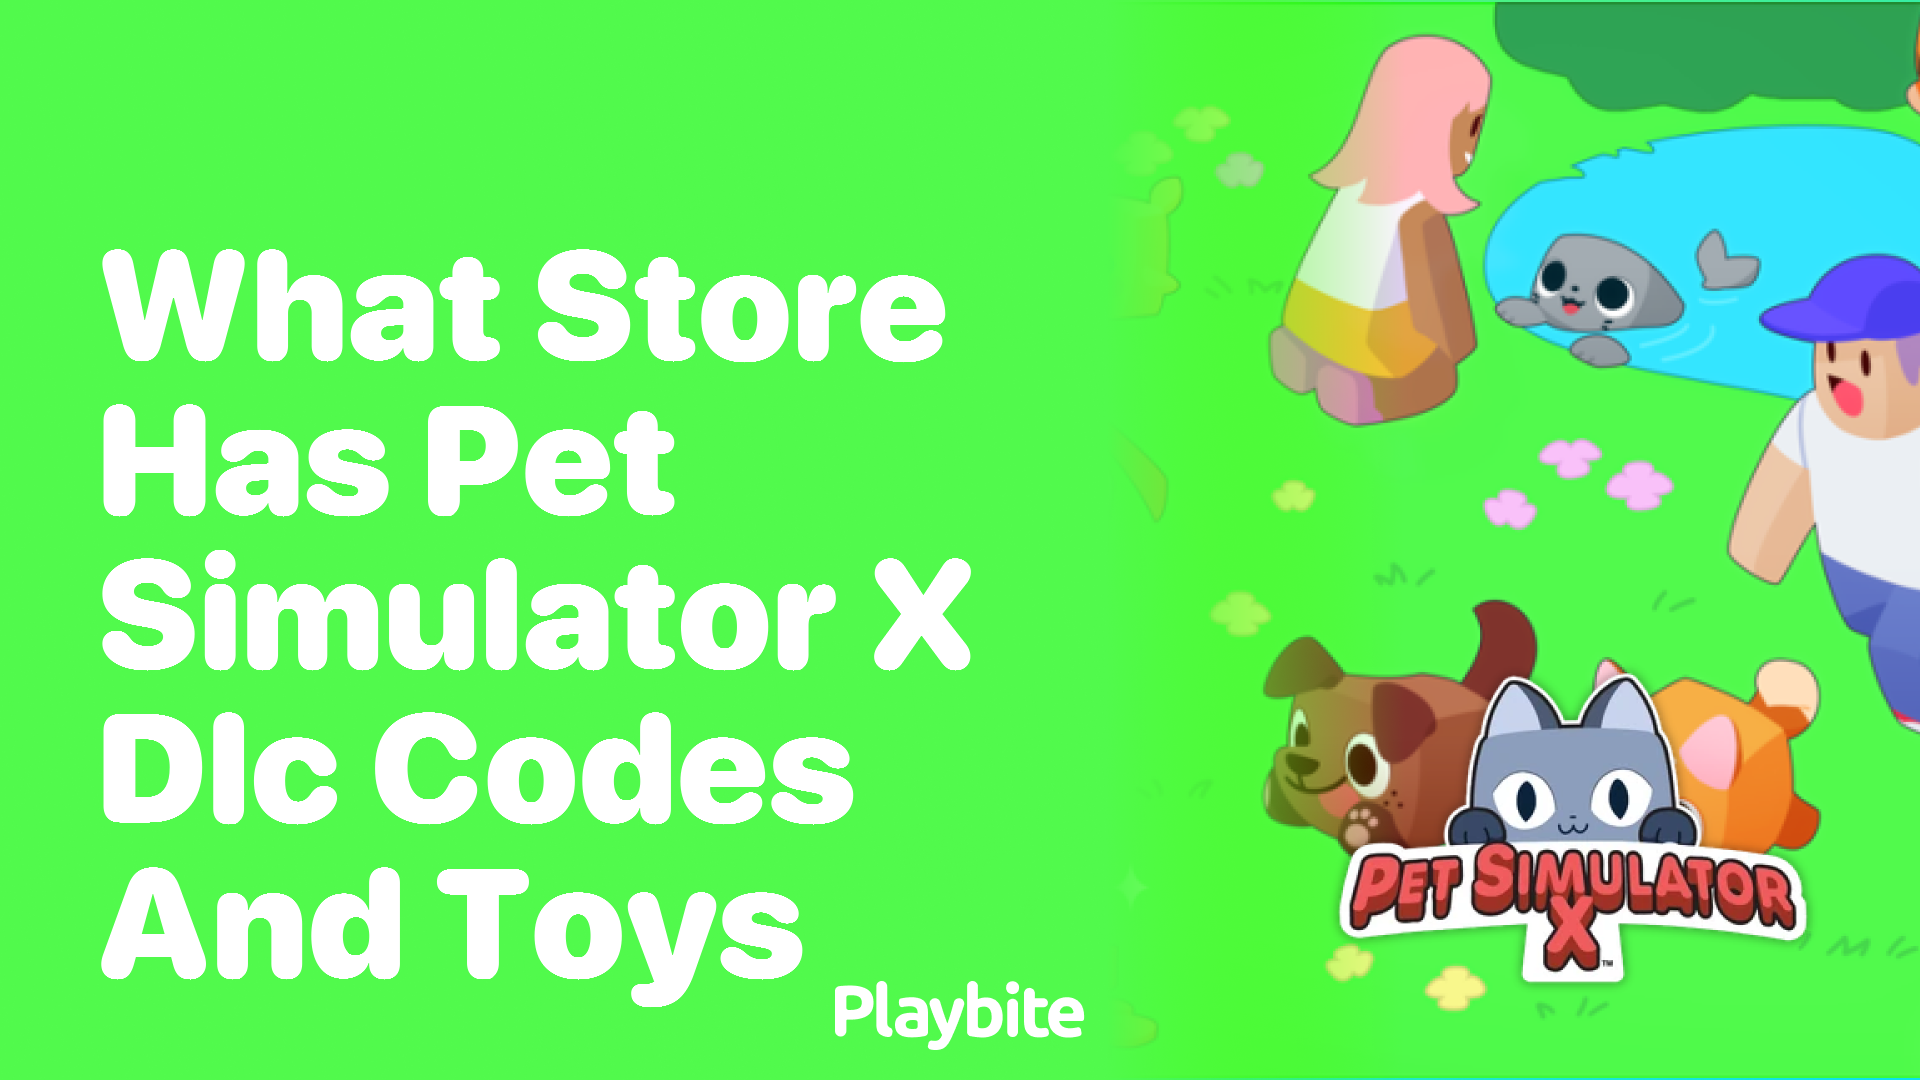 Where to Find Pet Simulator X DLC Codes and Toys